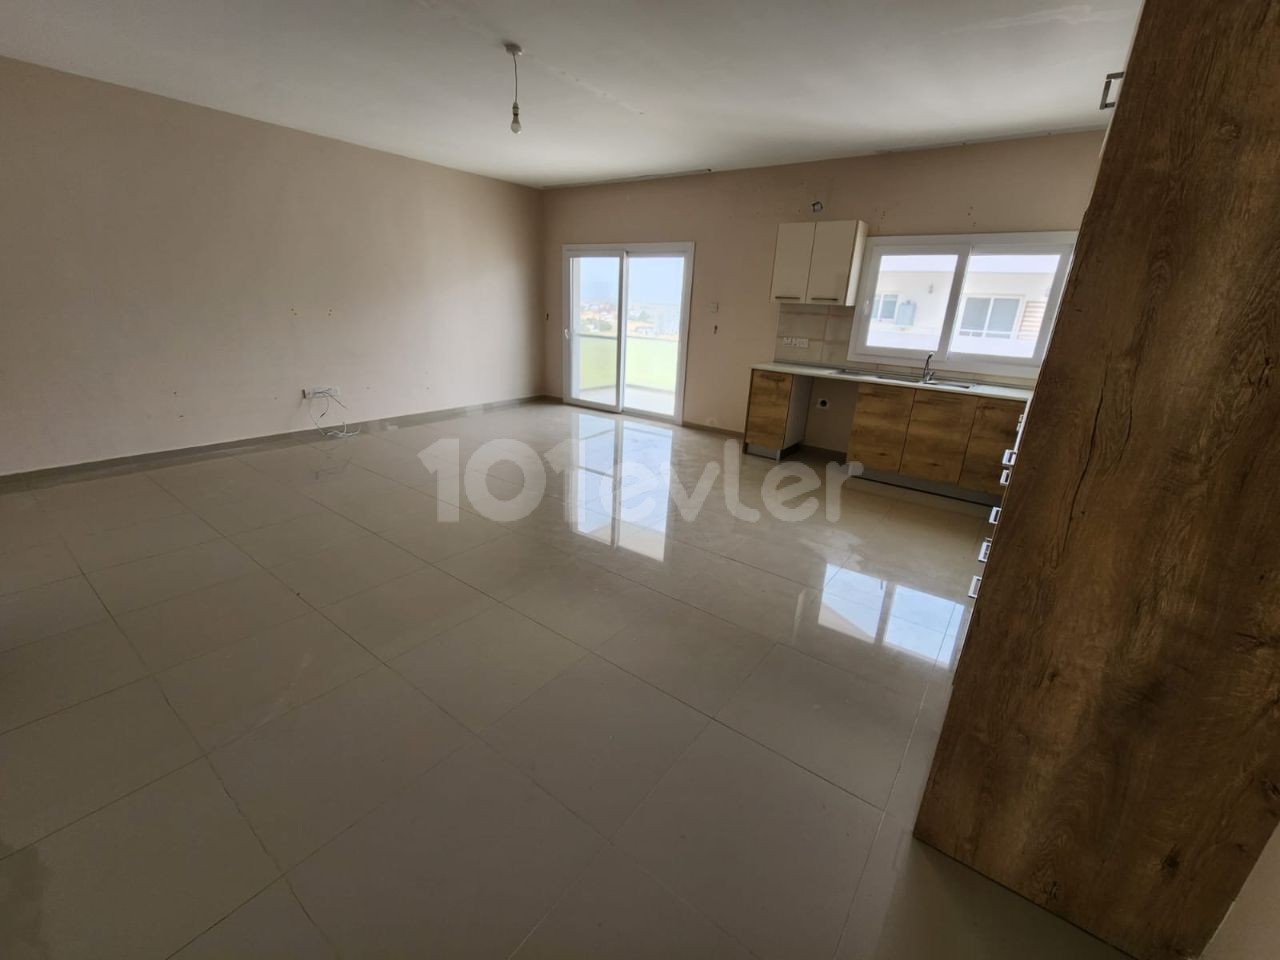 3+1 FLAT FOR RENT IN YENİ BOĞAZİÇİ FROM 15000 TL, 6 MONTHS PAYMENT + DEPOSIT + COMMISSION